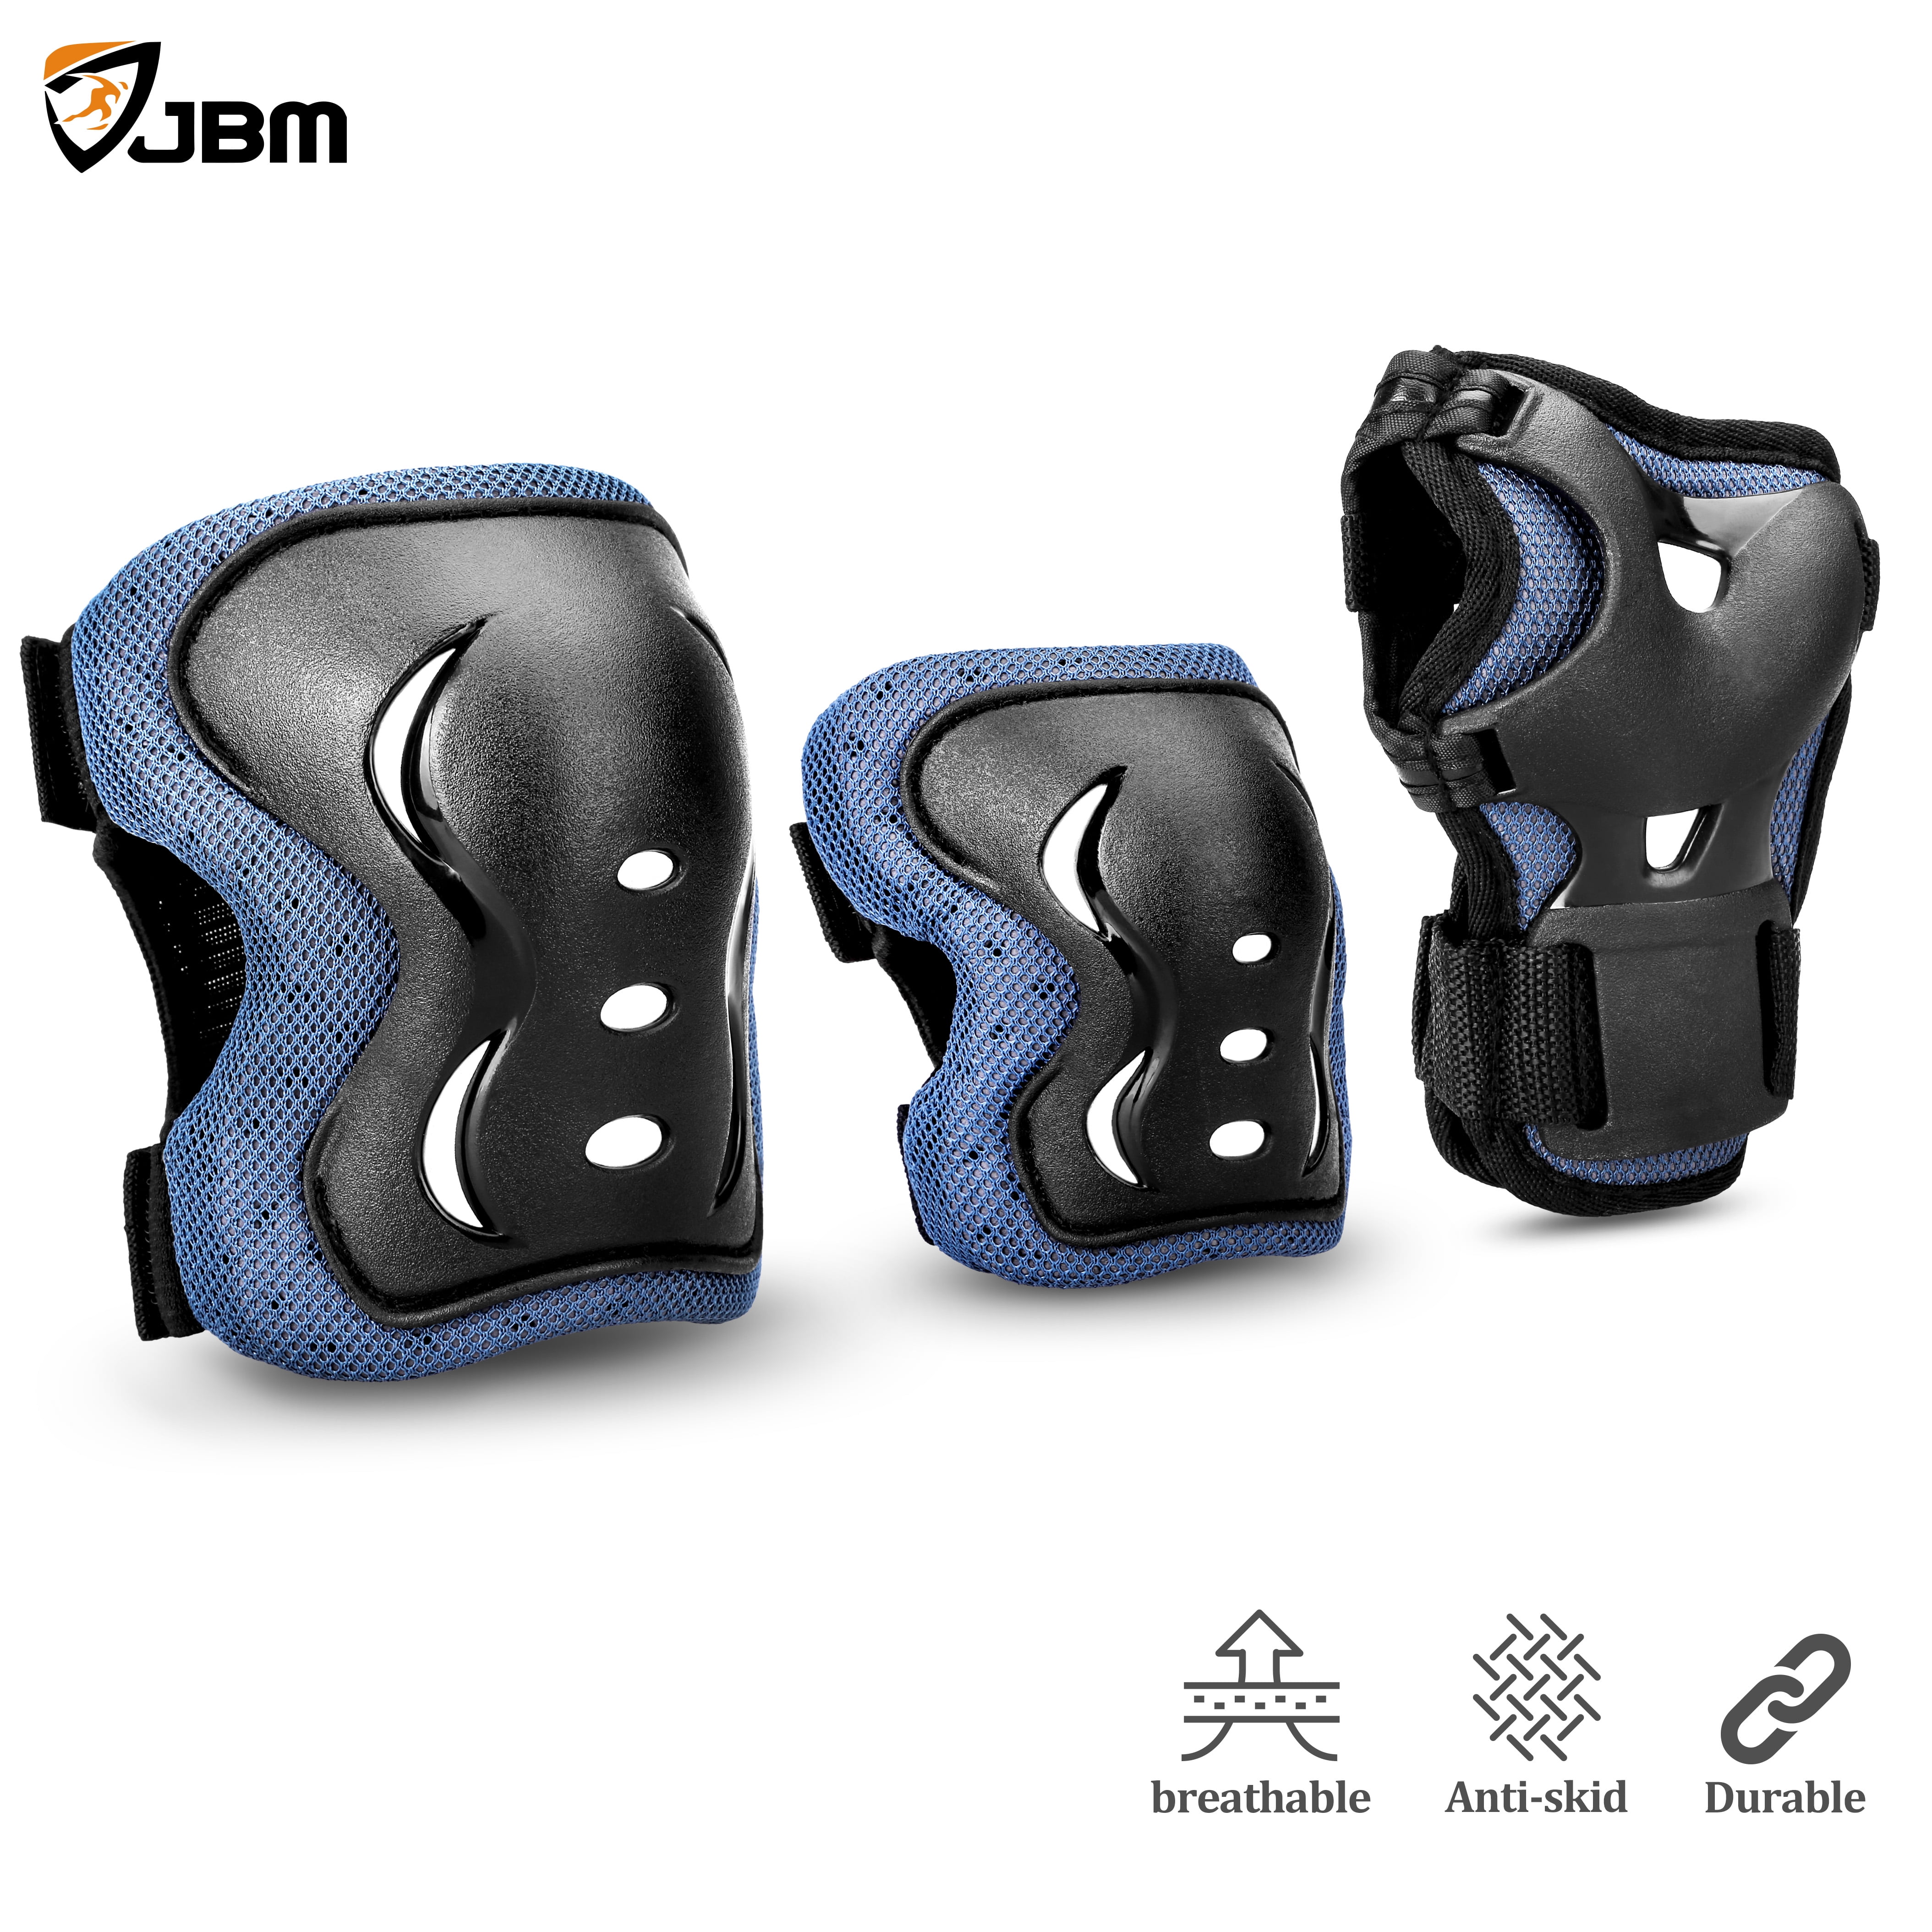 Elbow and Knee Pads Kids 6-13 Adjustable Strap for Skating Scooter Bike Riding Skateboard Cycling Rollerblading SKL Knee Pads for Kids Toddler 3 in 1 Protective Gear Set with Wrist Guards